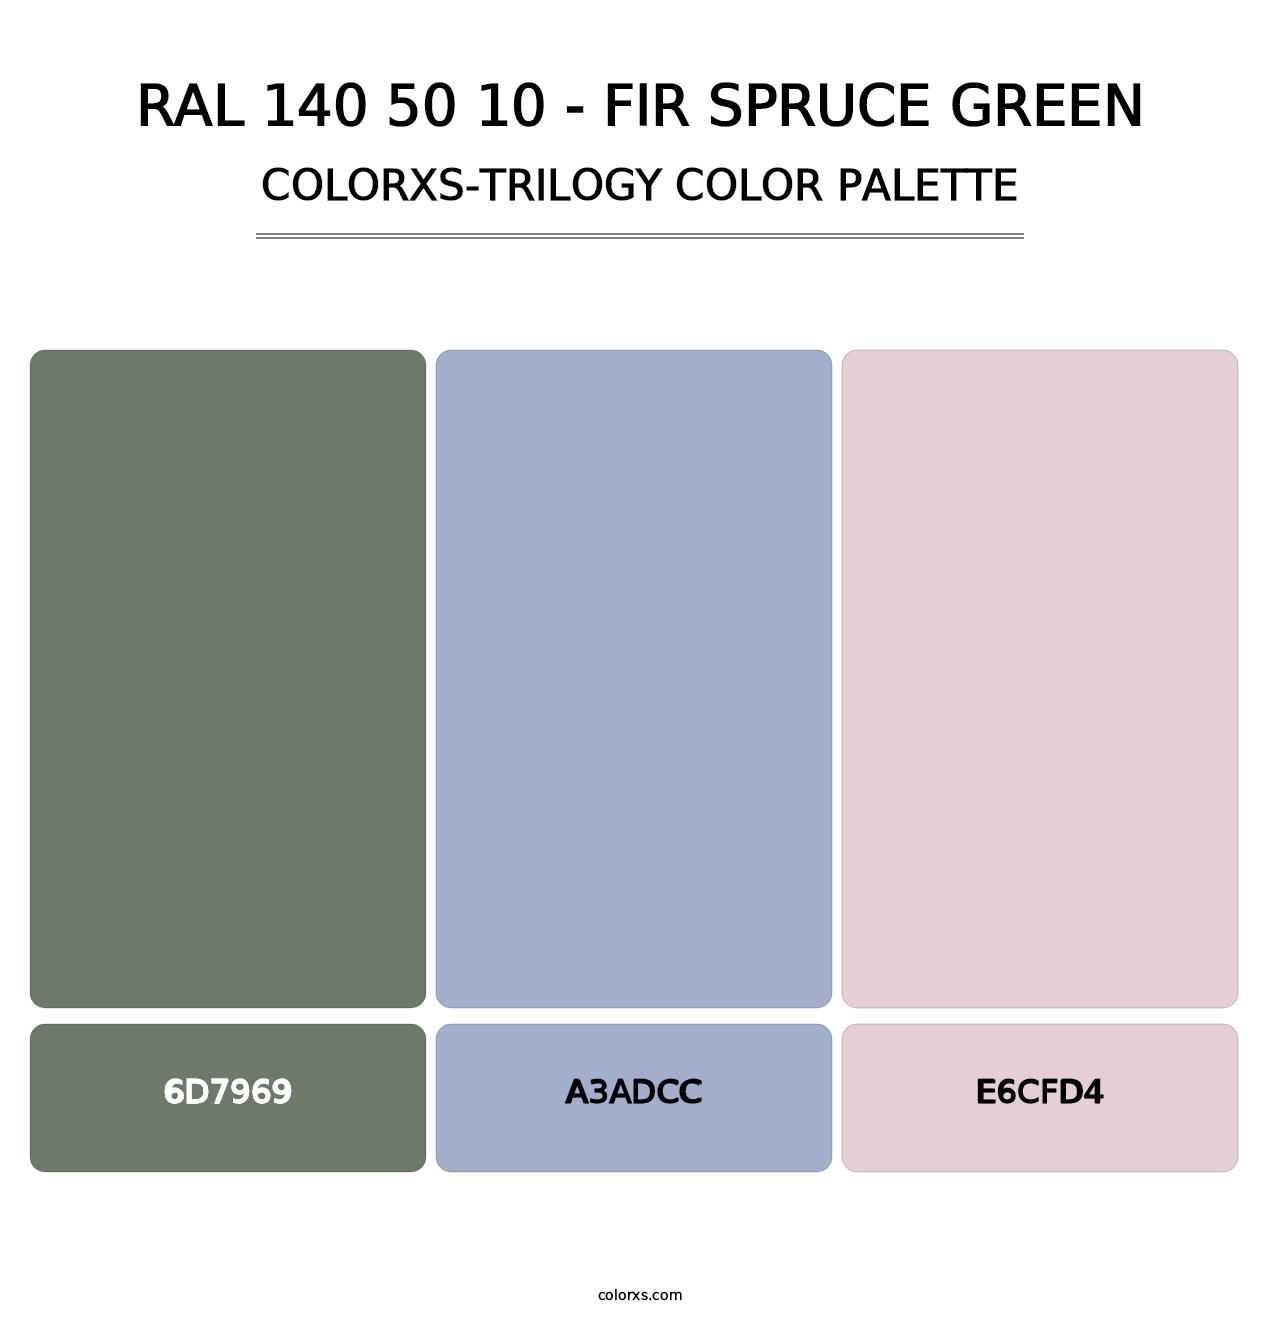 RAL 140 50 10 - Fir Spruce Green - Colorxs Trilogy Palette